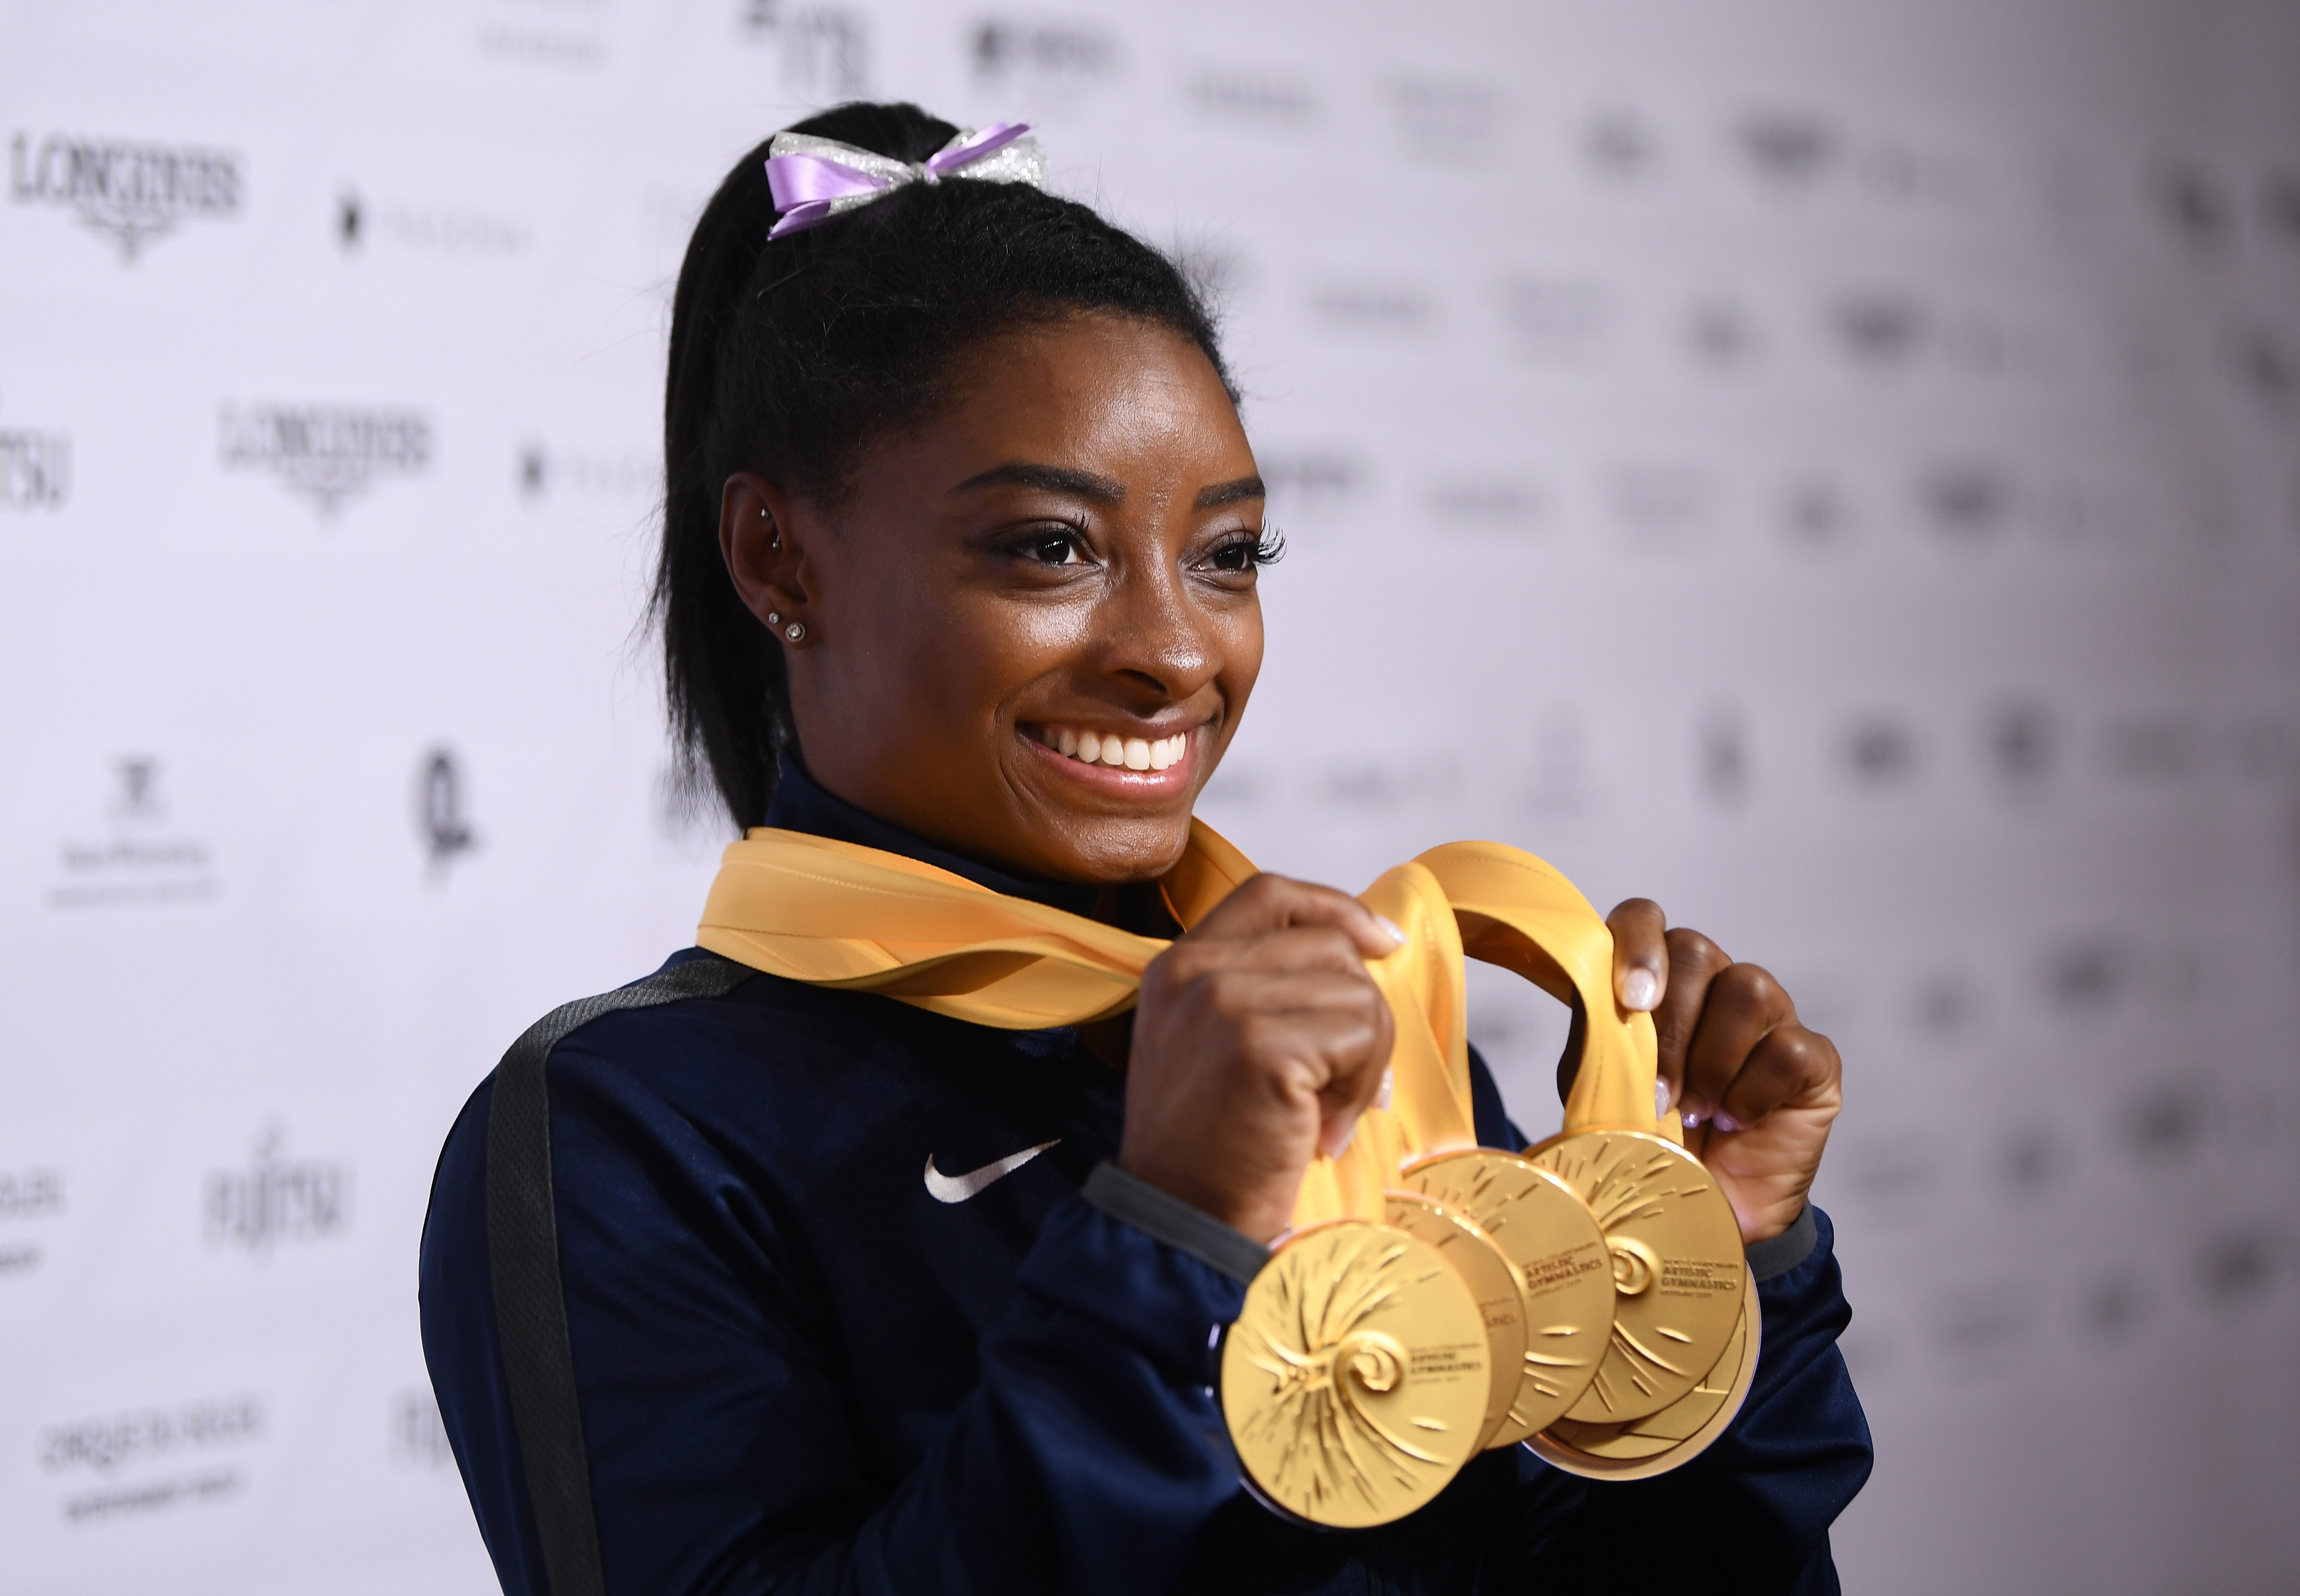 Simone Biles poses after the Apparatus Finals on Day 10 of the FIG Artistic Gymnastics World Championships at Hanns Martin Schleyer Hall on October 13, 2019 in Stuttgart, Germany. | Source: Getty Images